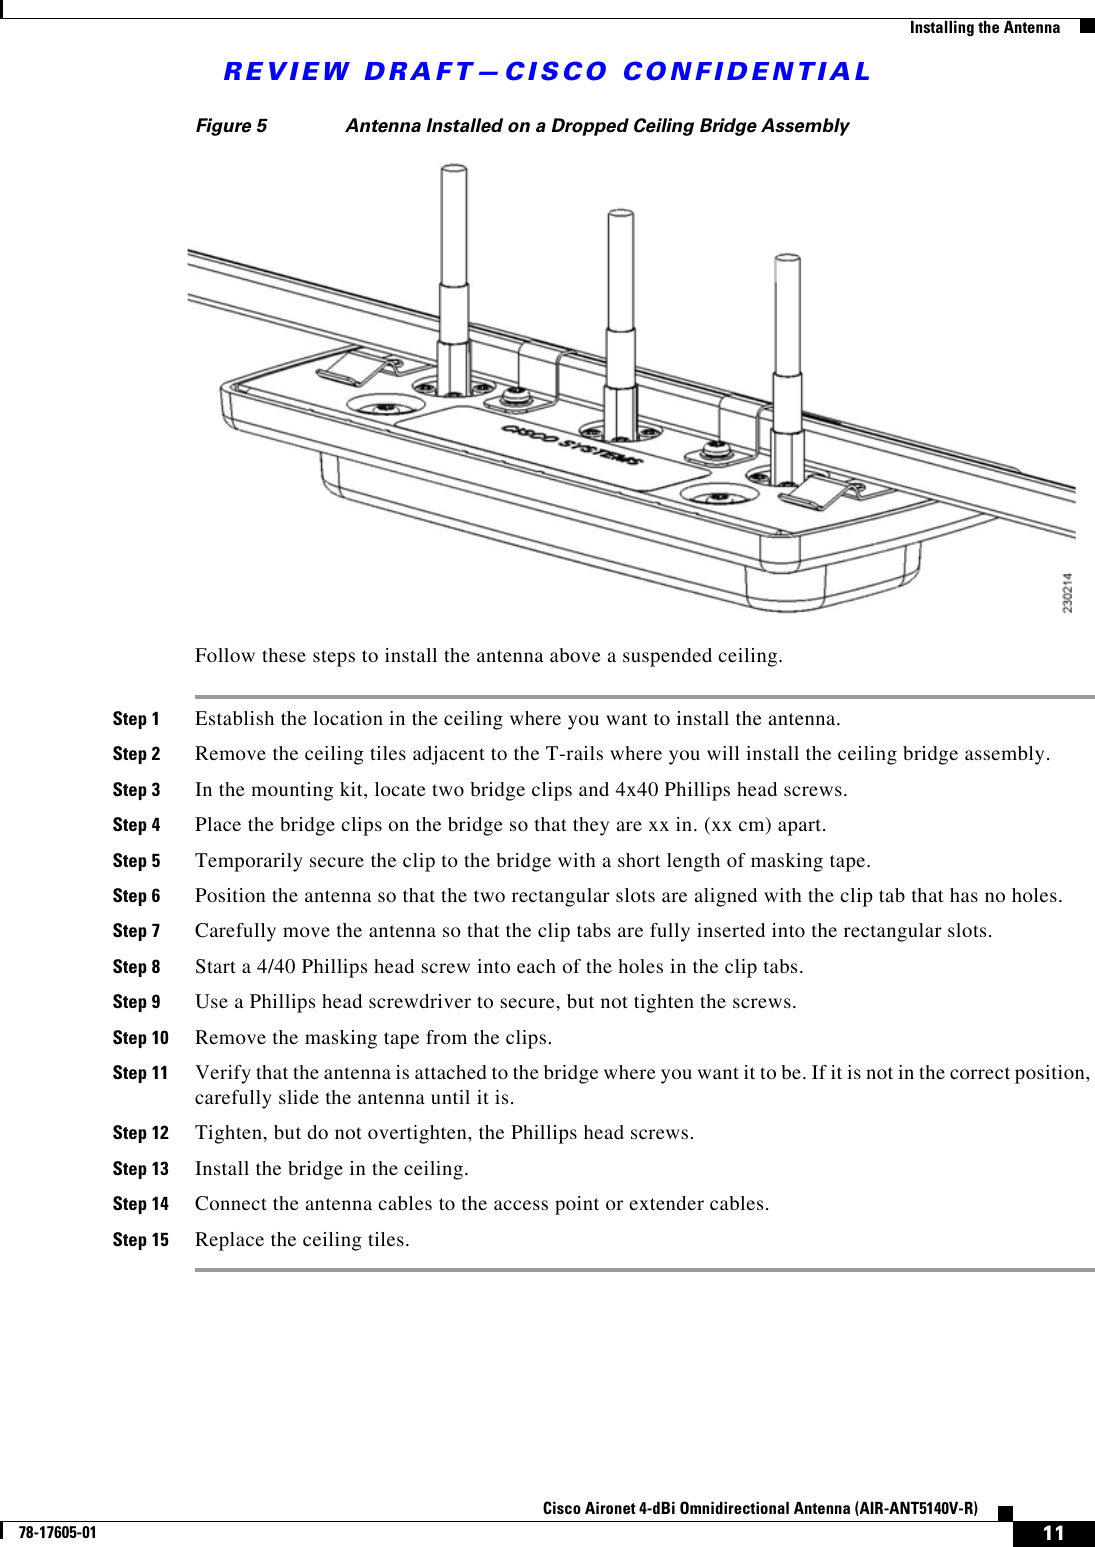 REVIEW DRAFT—CISCO CONFIDENTIAL11Cisco Aironet 4-dBi Omnidirectional Antenna (AIR-ANT5140V-R)78-17605-01  Installing the AntennaFigure 5 Antenna Installed on a Dropped Ceiling Bridge AssemblyFollow these steps to install the antenna above a suspended ceiling.Step 1 Establish the location in the ceiling where you want to install the antenna.Step 2 Remove the ceiling tiles adjacent to the T-rails where you will install the ceiling bridge assembly.Step 3 In the mounting kit, locate two bridge clips and 4x40 Phillips head screws.Step 4 Place the bridge clips on the bridge so that they are xx in. (xx cm) apart.Step 5 Temporarily secure the clip to the bridge with a short length of masking tape.Step 6 Position the antenna so that the two rectangular slots are aligned with the clip tab that has no holes.Step 7 Carefully move the antenna so that the clip tabs are fully inserted into the rectangular slots.Step 8 Start a 4/40 Phillips head screw into each of the holes in the clip tabs.Step 9 Use a Phillips head screwdriver to secure, but not tighten the screws.Step 10 Remove the masking tape from the clips.Step 11 Verify that the antenna is attached to the bridge where you want it to be. If it is not in the correct position, carefully slide the antenna until it is.Step 12 Tighten, but do not overtighten, the Phillips head screws.Step 13 Install the bridge in the ceiling.Step 14 Connect the antenna cables to the access point or extender cables.Step 15 Replace the ceiling tiles.